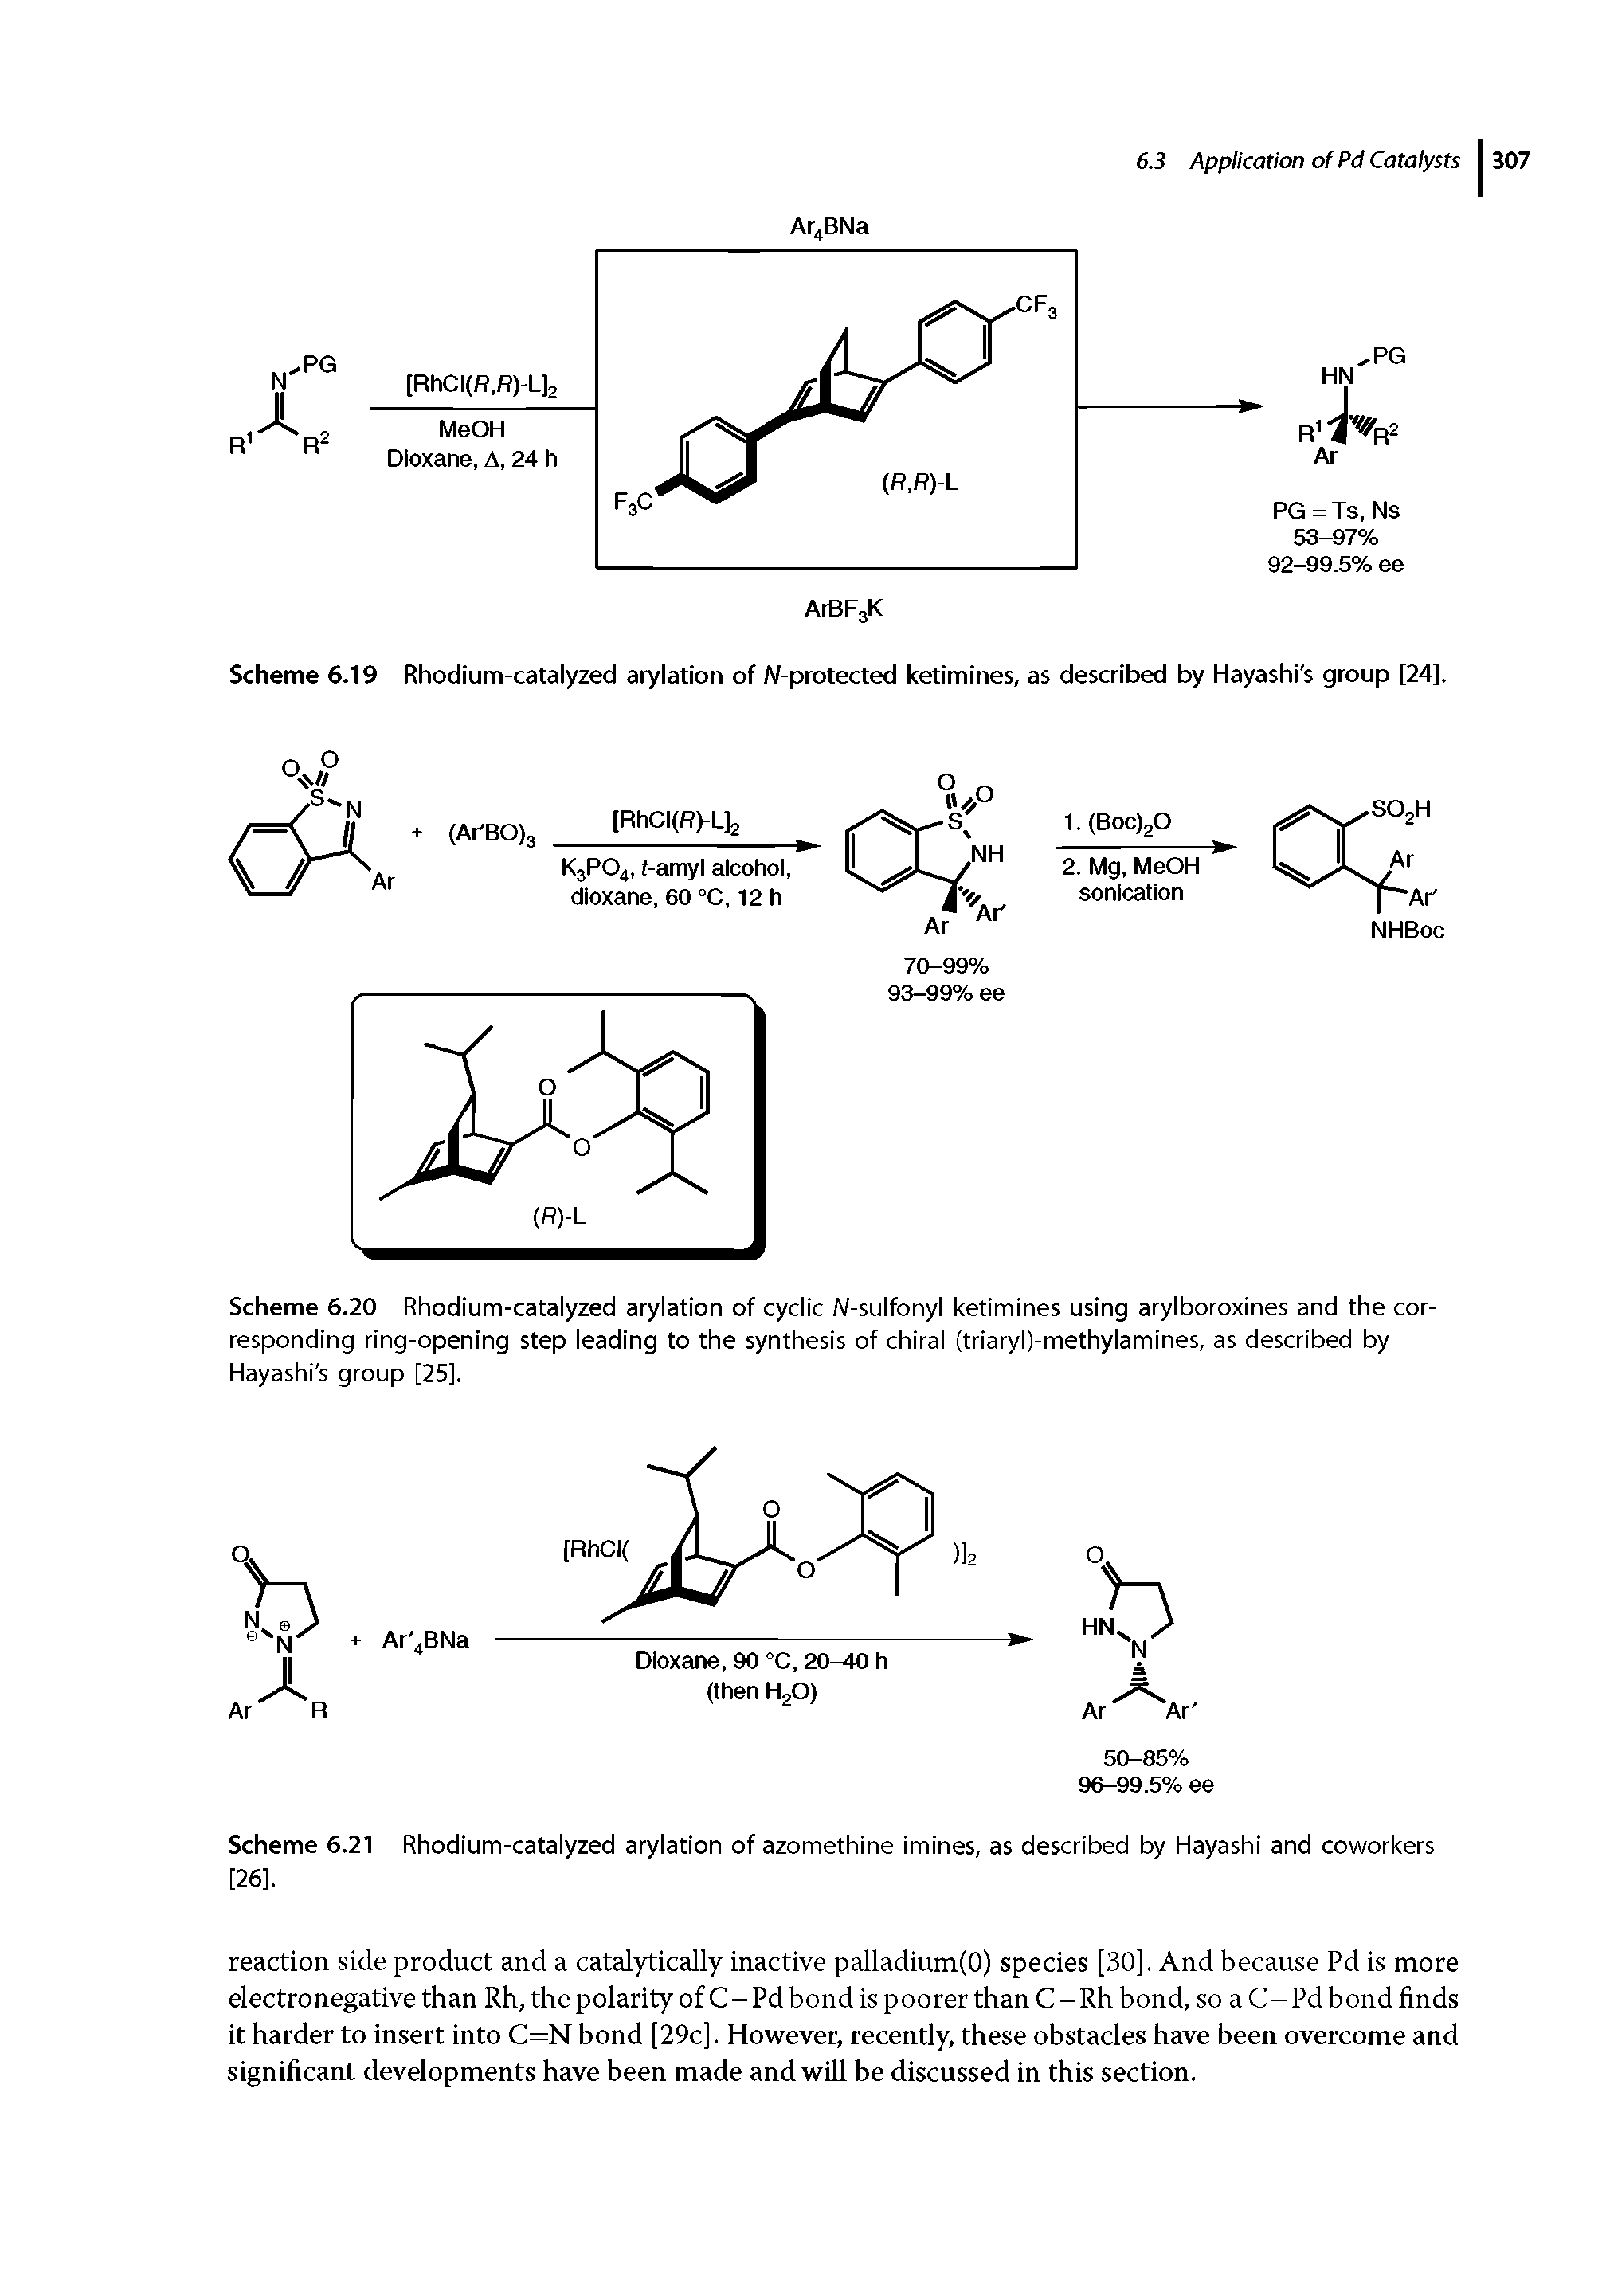 Scheme 6.20 Rhodium-catalyzed arylation of cyclic W-sulfonyl ketimines using arylboroxines and the corresponding ring-opening step leading to the synthesis of chiral (triaryl)-methylamines, as described by...